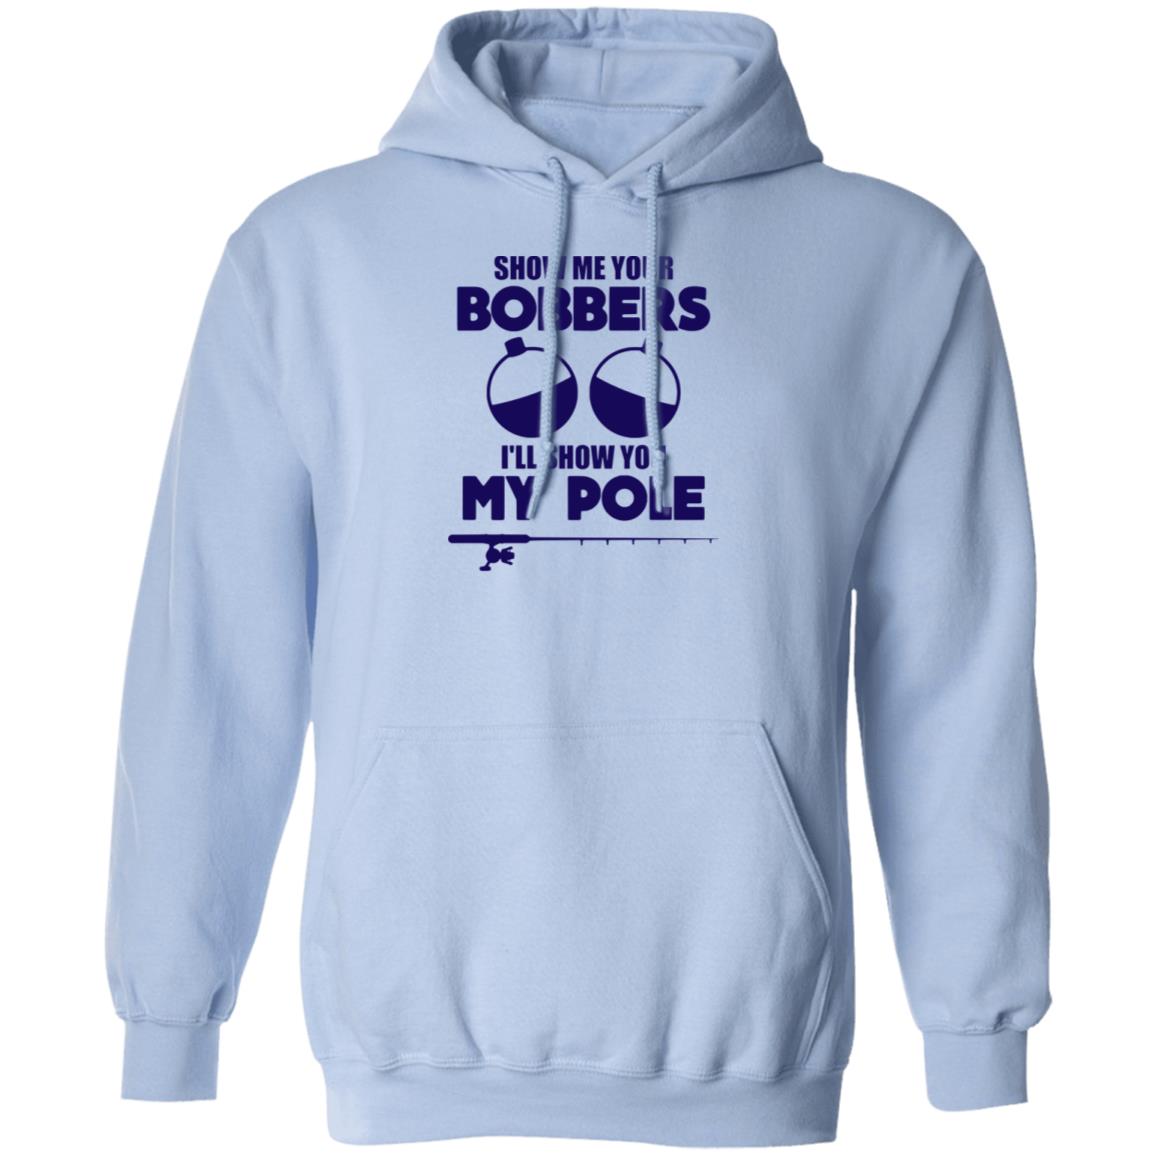 HRCL FL - Navy Show Me Your Bobbers I'll Show You My Pole - 2 Sided G185 Pullover Hoodie